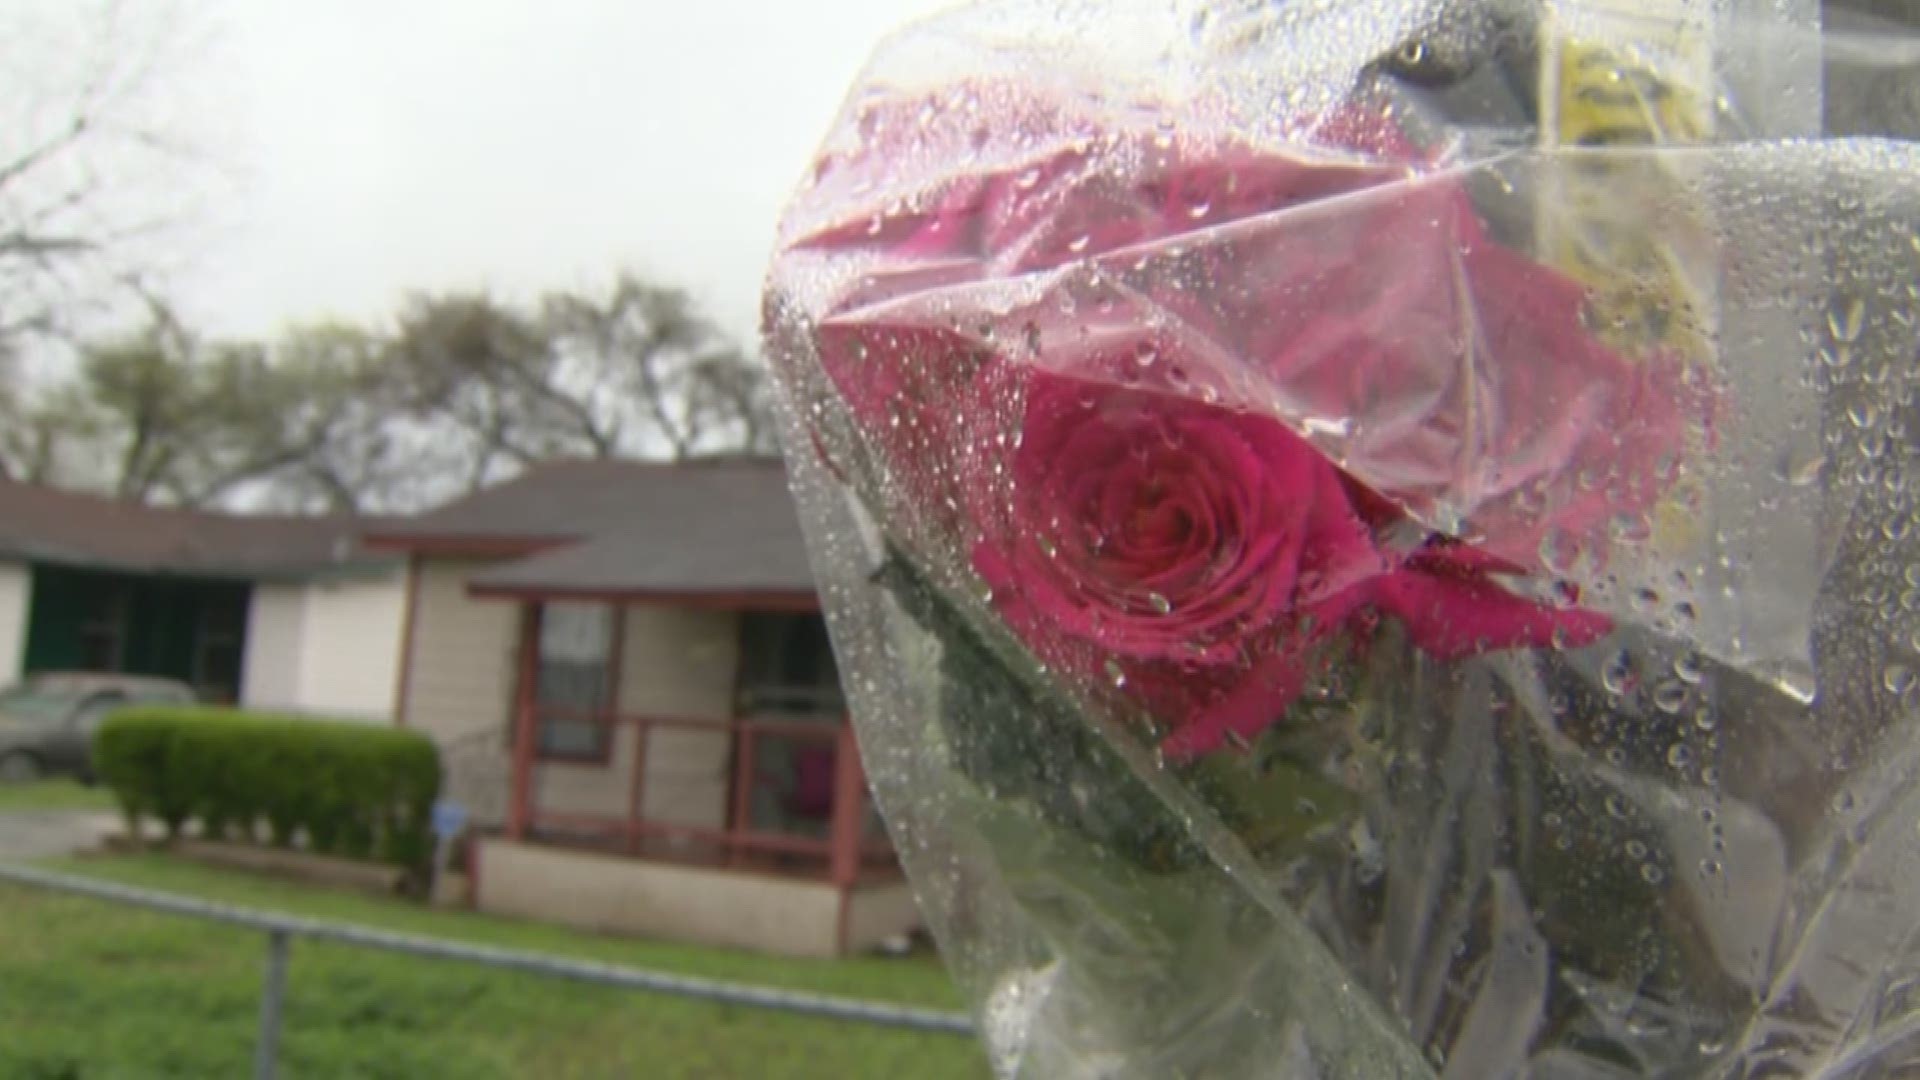 Manuel Gonzales has been arrested in the shooting death of 17-year-old Sarah Aguilar. Eyewitness news reporter Adi Guajardo spoke with a neighbor on the south side who woke up to the chaos.